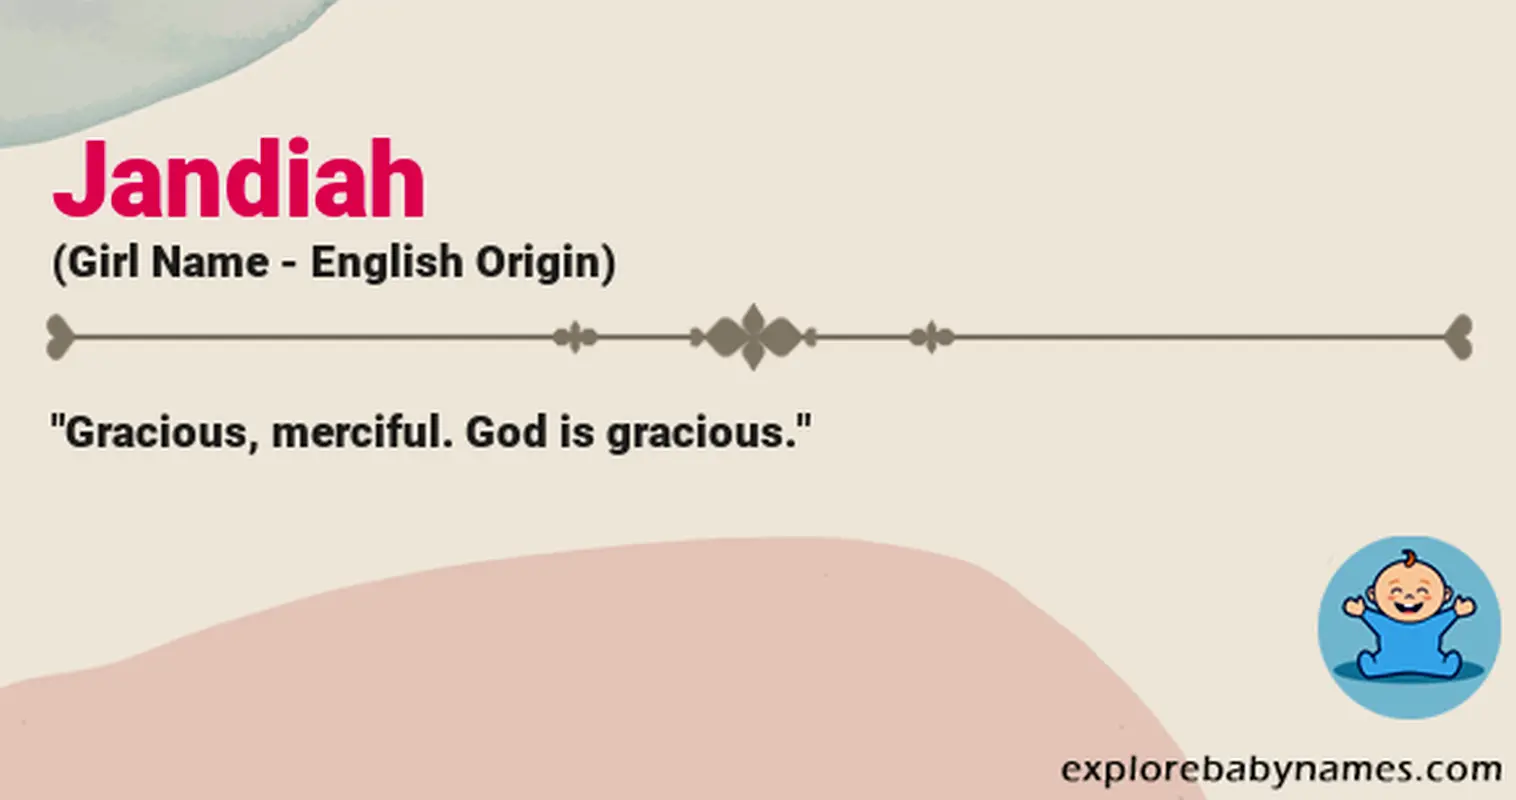 Meaning of Jandiah